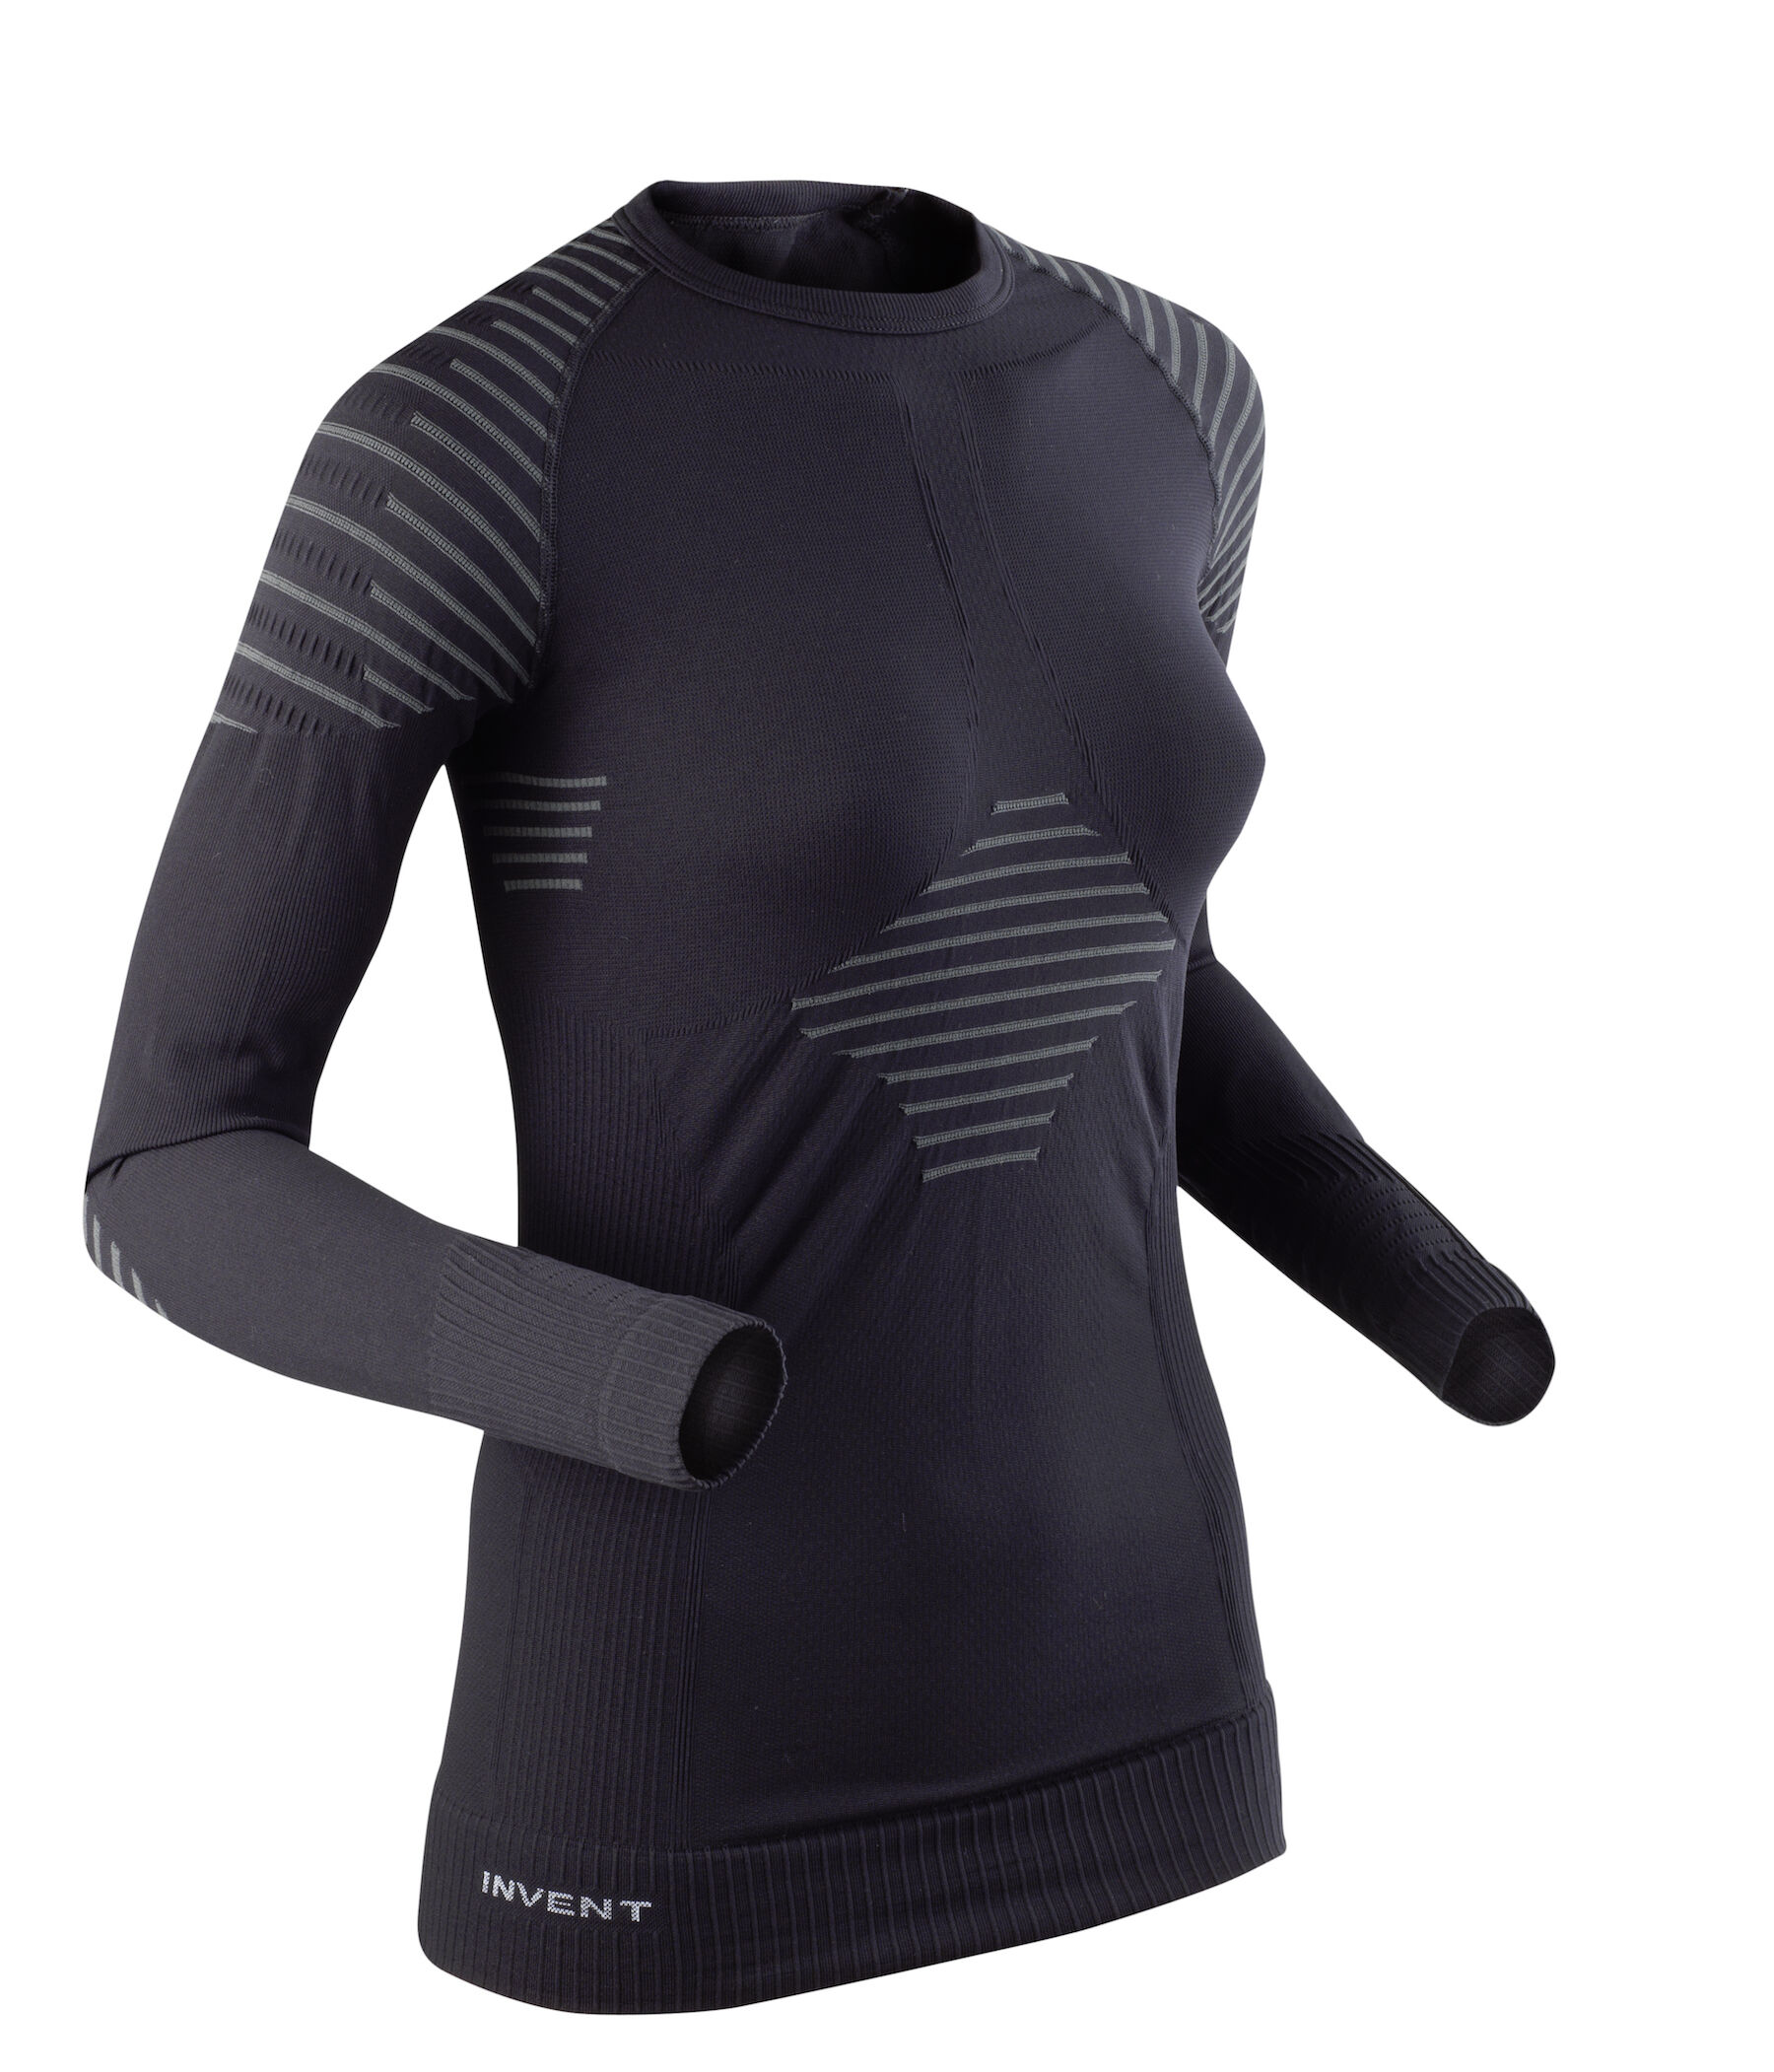 X-Bionic - Invent shirt long sleeves - Camiseta técnica - Mujer